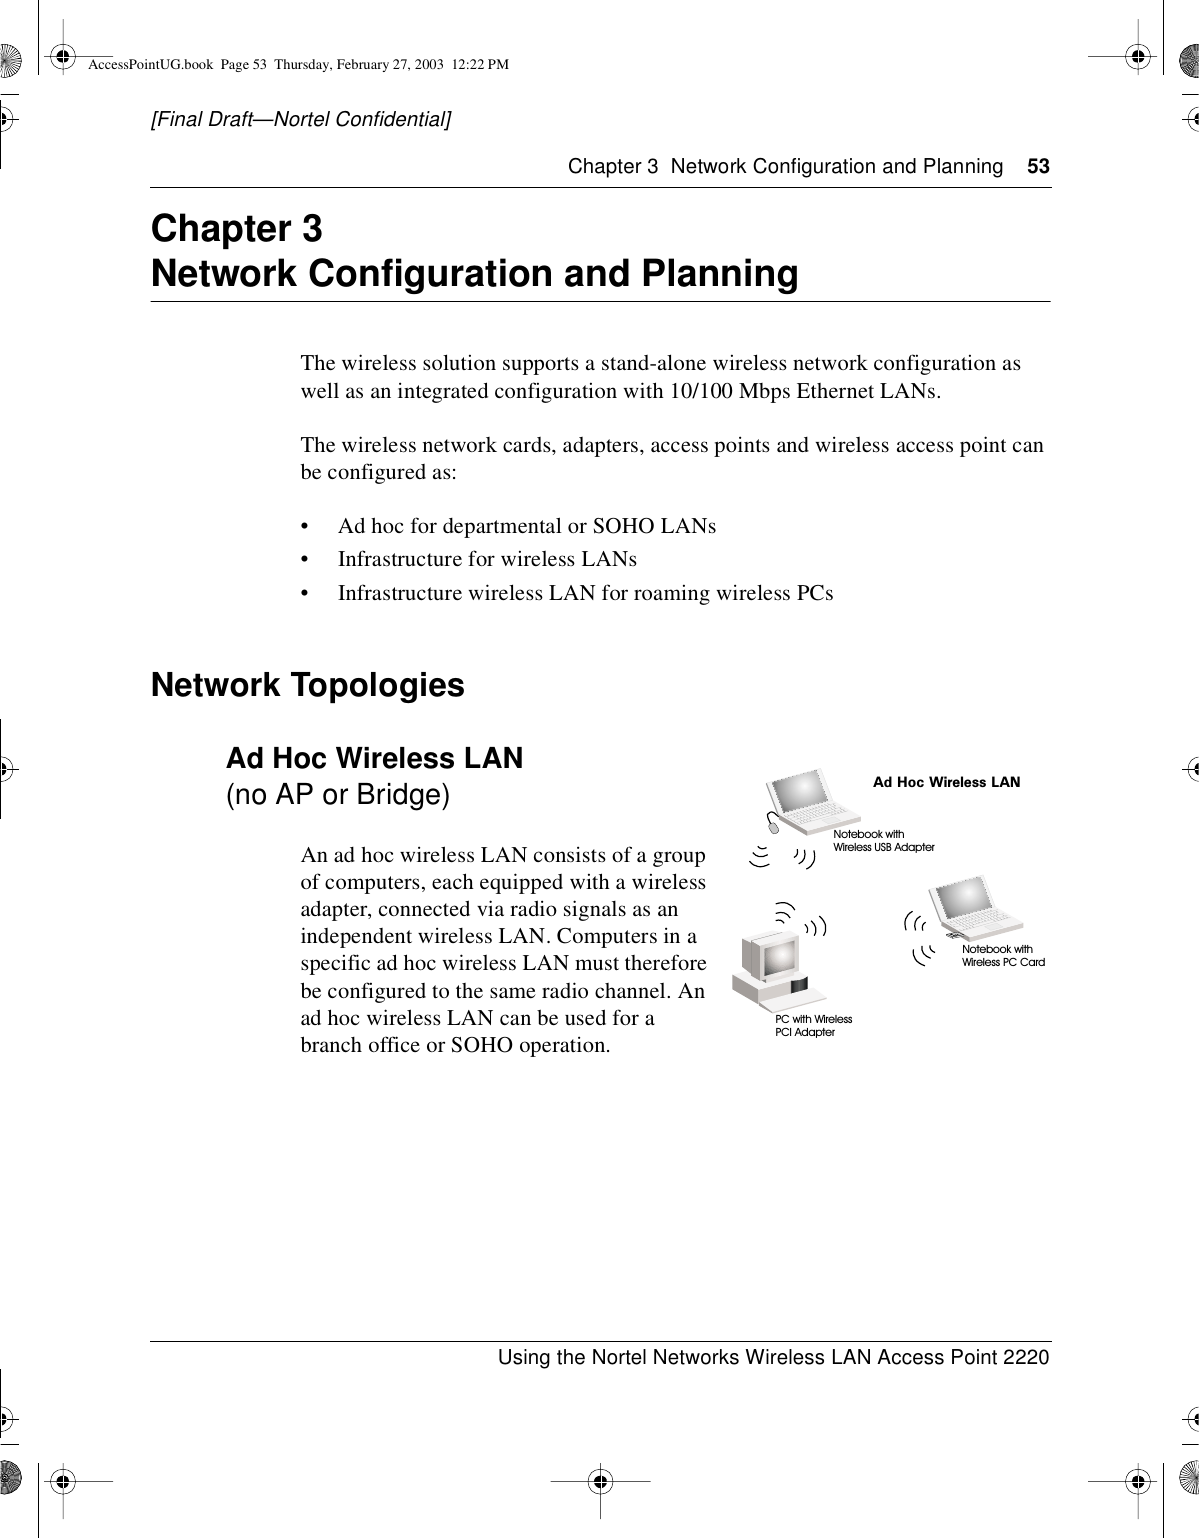 Chapter 3 Network Configuration and Planning 53Using the Nortel Networks Wireless LAN Access Point 2220[Final Draft—Nortel Confidential]Chapter 3Network Configuration and PlanningThe wireless solution supports a stand-alone wireless network configuration aswell as an integrated configuration with 10/100 Mbps Ethernet LANs.The wireless network cards, adapters, access points and wireless access point canbe configured as:• Ad hoc for departmental or SOHO LANs• Infrastructure for wireless LANs• Infrastructure wireless LAN for roaming wireless PCsNetwork TopologiesAd Hoc Wireless LAN(no AP or Bridge)An ad hoc wireless LAN consists of a groupof computers, each equipped with a wirelessadapter, connected via radio signals as anindependent wireless LAN. Computers in aspecific ad hoc wireless LAN must thereforebe configured to the same radio channel. Anad hoc wireless LAN can be used for abranch office or SOHO operation.Ad Hoc Wireless LANNotebook withWireless USB AdapterNotebook withWireless PC CardPC with WirelessPCI AdapterAccessPointUG.book Page 53 Thursday, February 27, 2003 12:22 PM